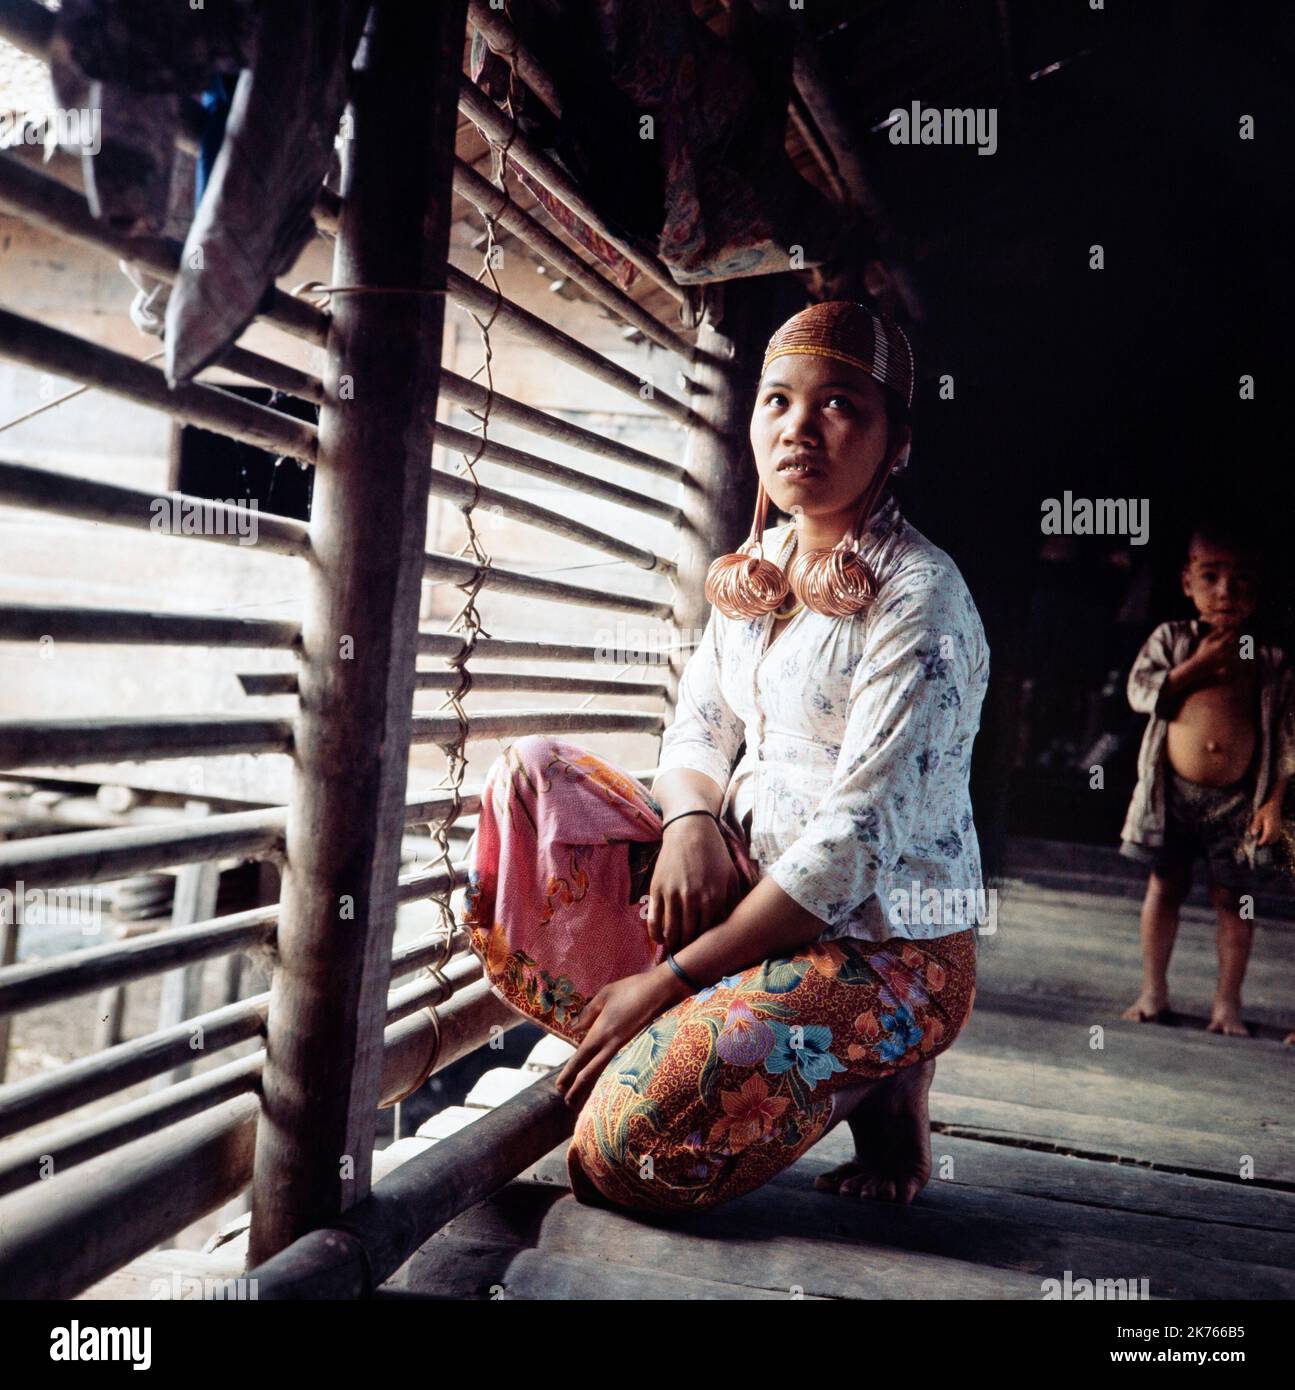 A vintage colour photograph taken in February 1965 showing a woman of the Dayak tribe of North Borneo Stock Photo